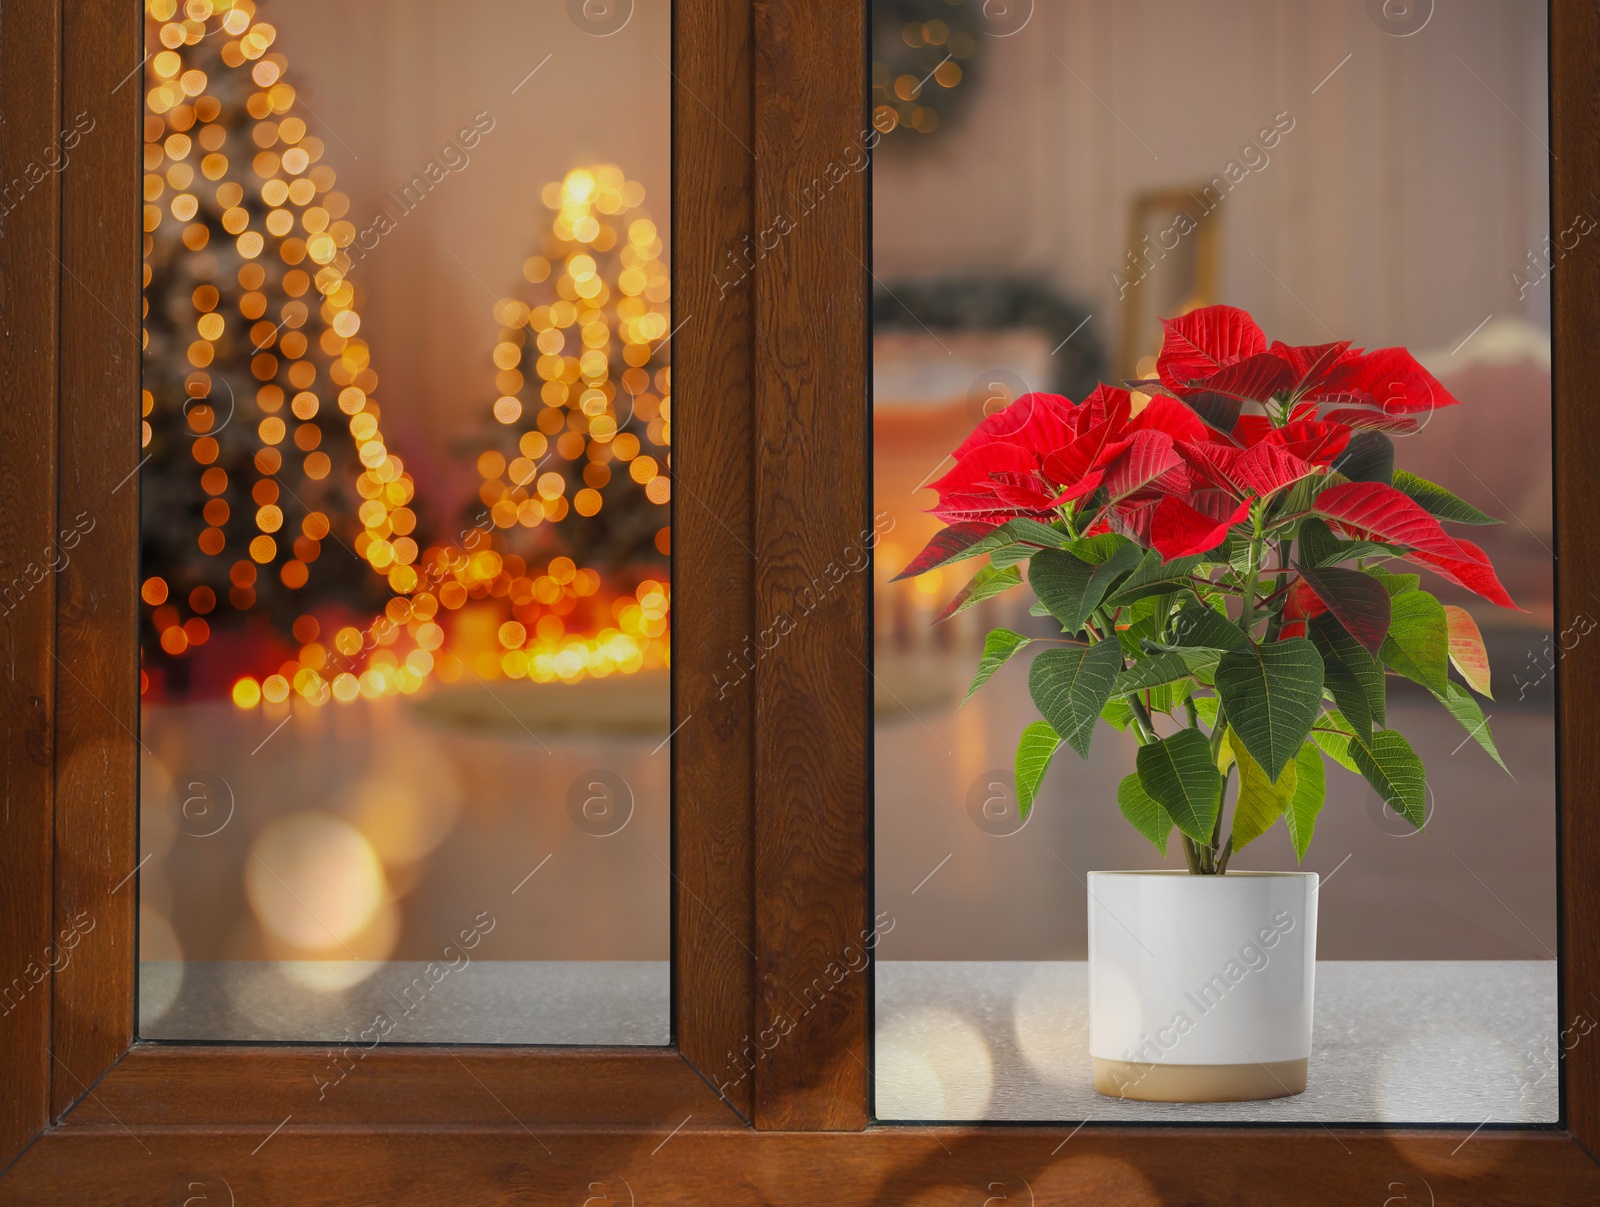 Image of Christmas traditional poinsettia flower on sill in decorated room, view through window, space for text